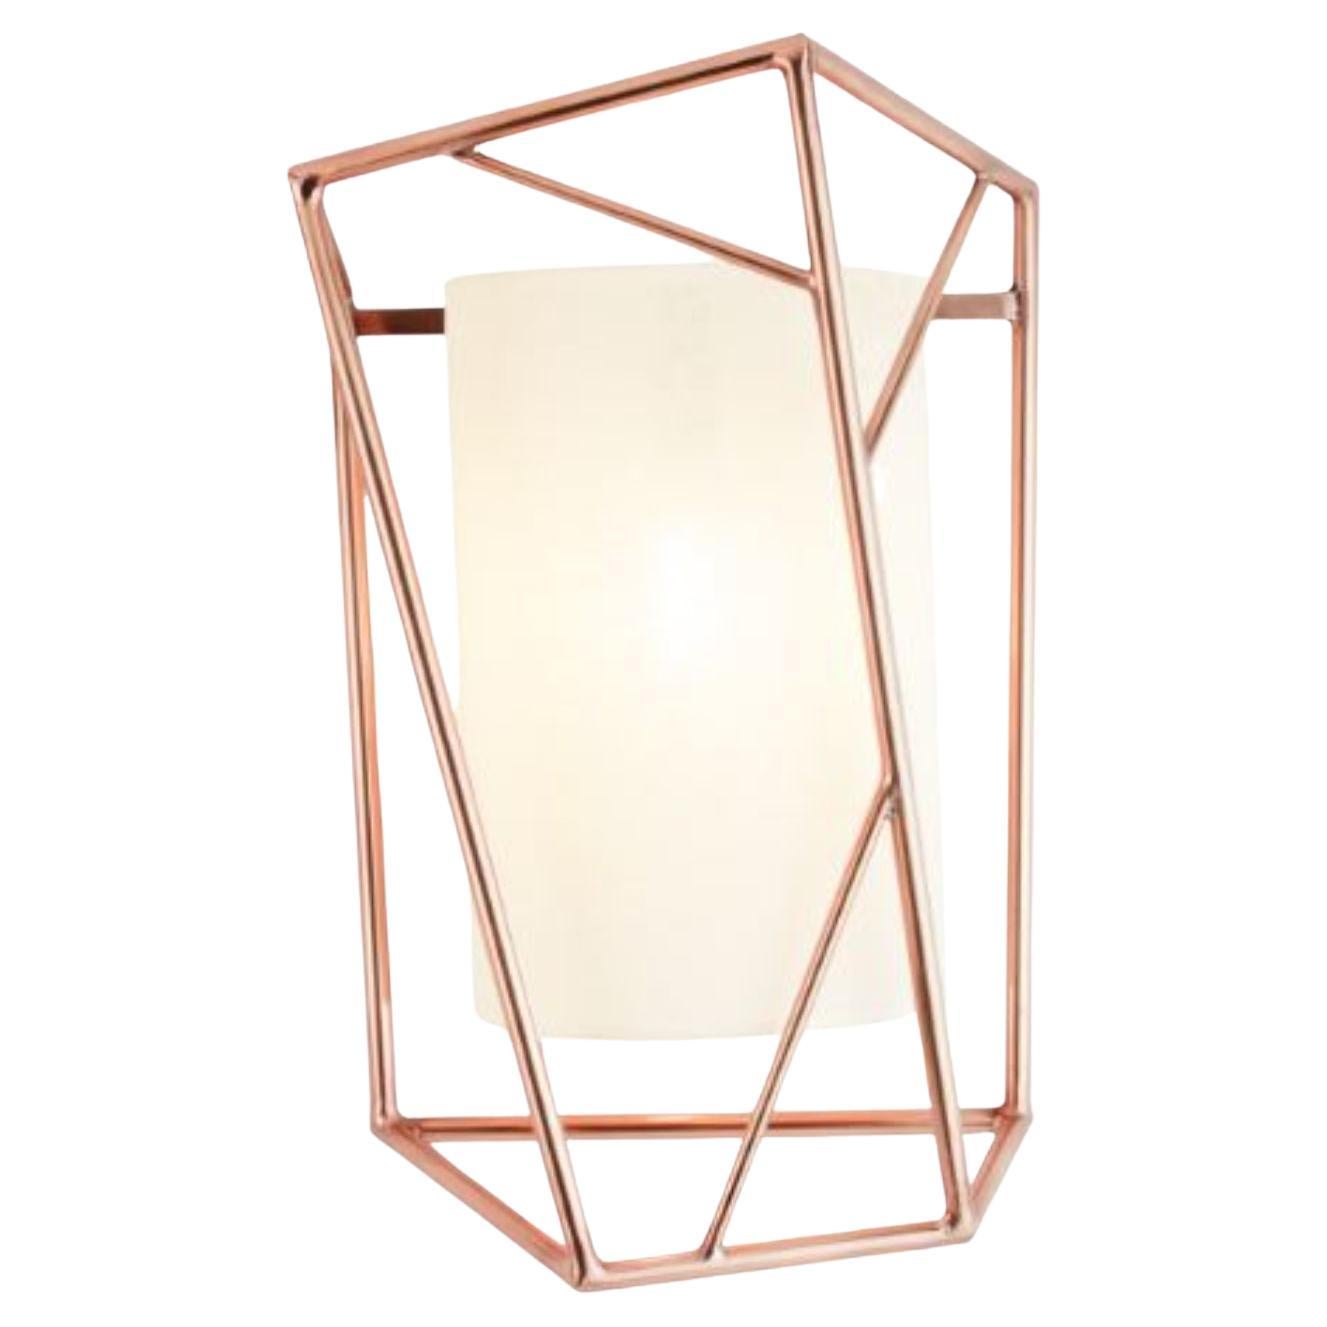 Copper Star Wall Lamp by Dooq